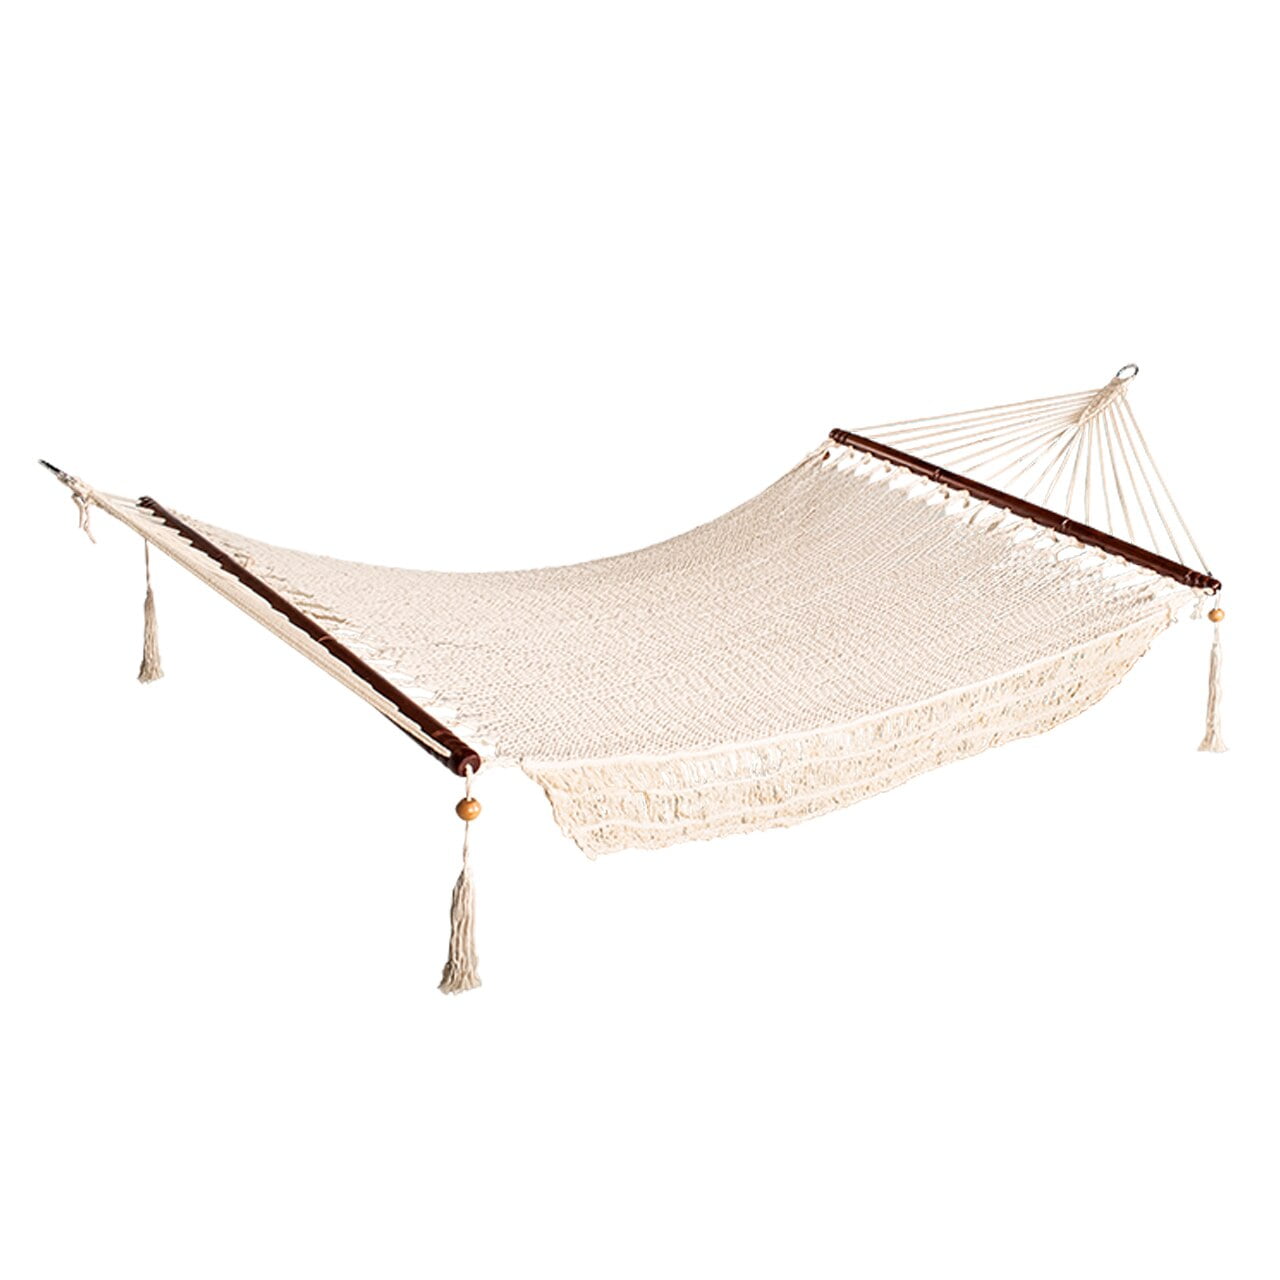 Wood Spreader Bars Patio 360-Pound Weight Capacity Poolside Starburst Stripe Bliss Hammocks BV-404C Outdoor Hammock w/Pillow Breathable Quick-Dry Material for Comfort for Backyard